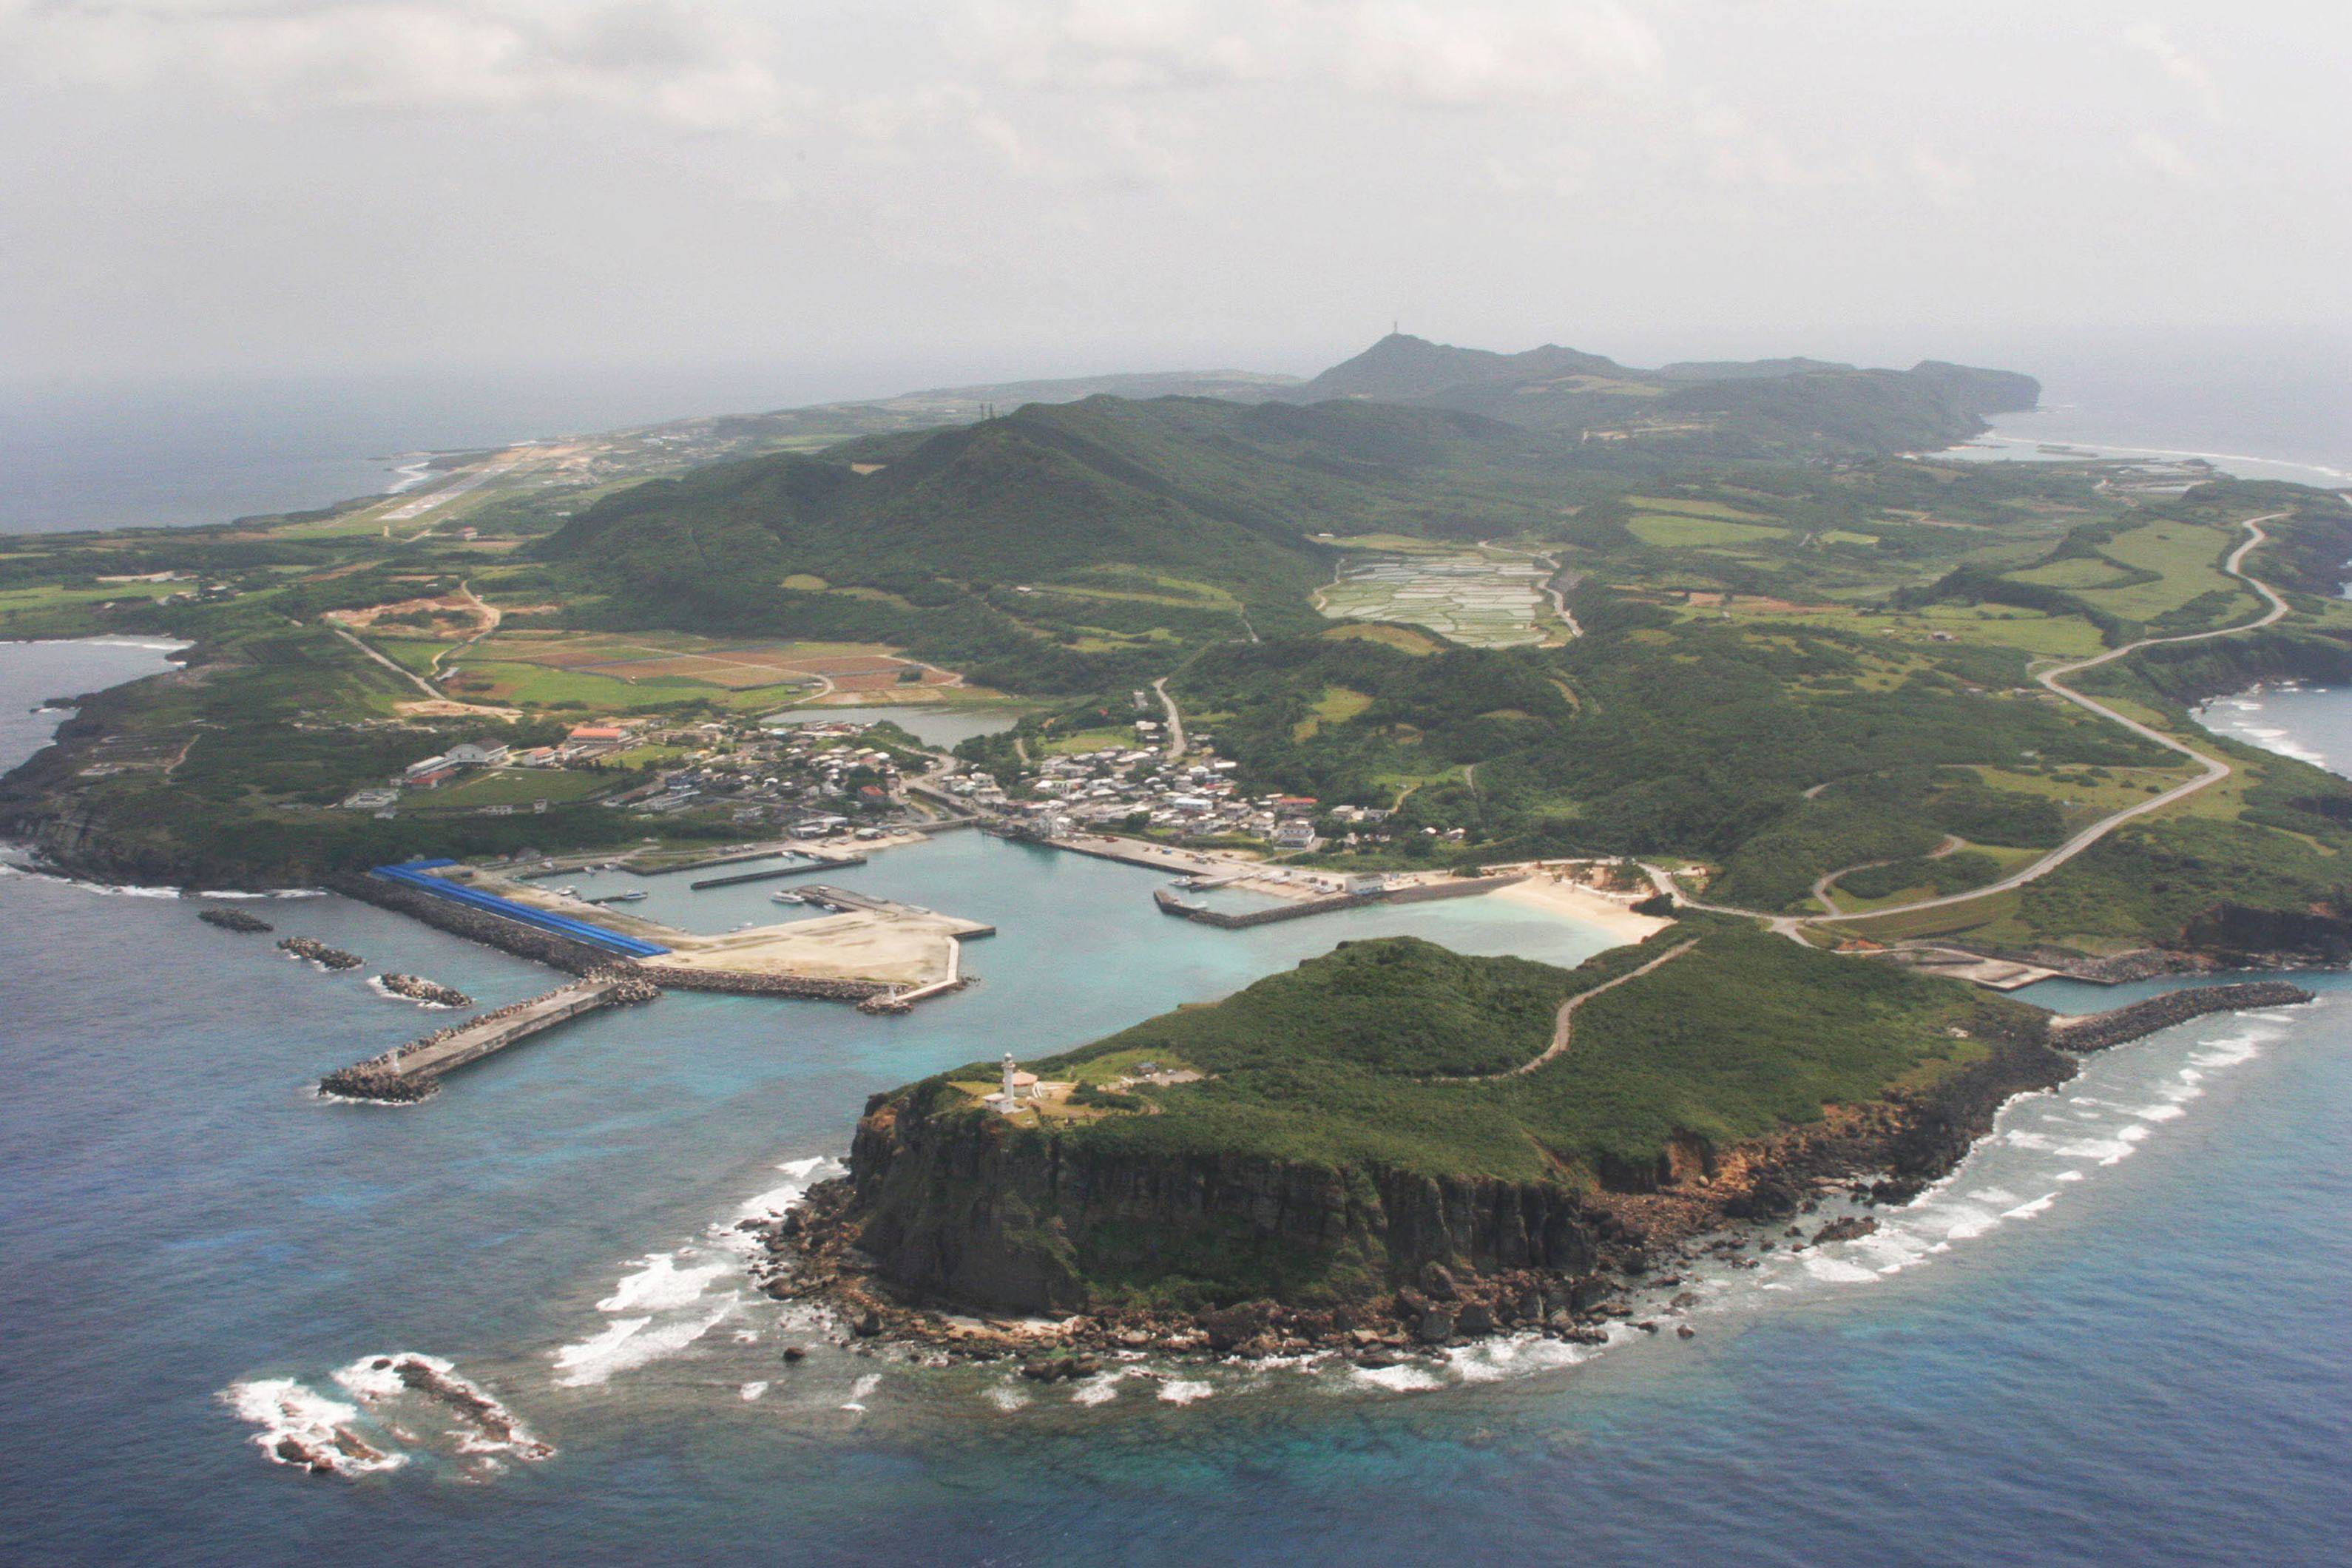 Yonaguni island in Japan’s Okinawa prefecture is only 111km from Taiwan. File photo: Reuters/Kyodo